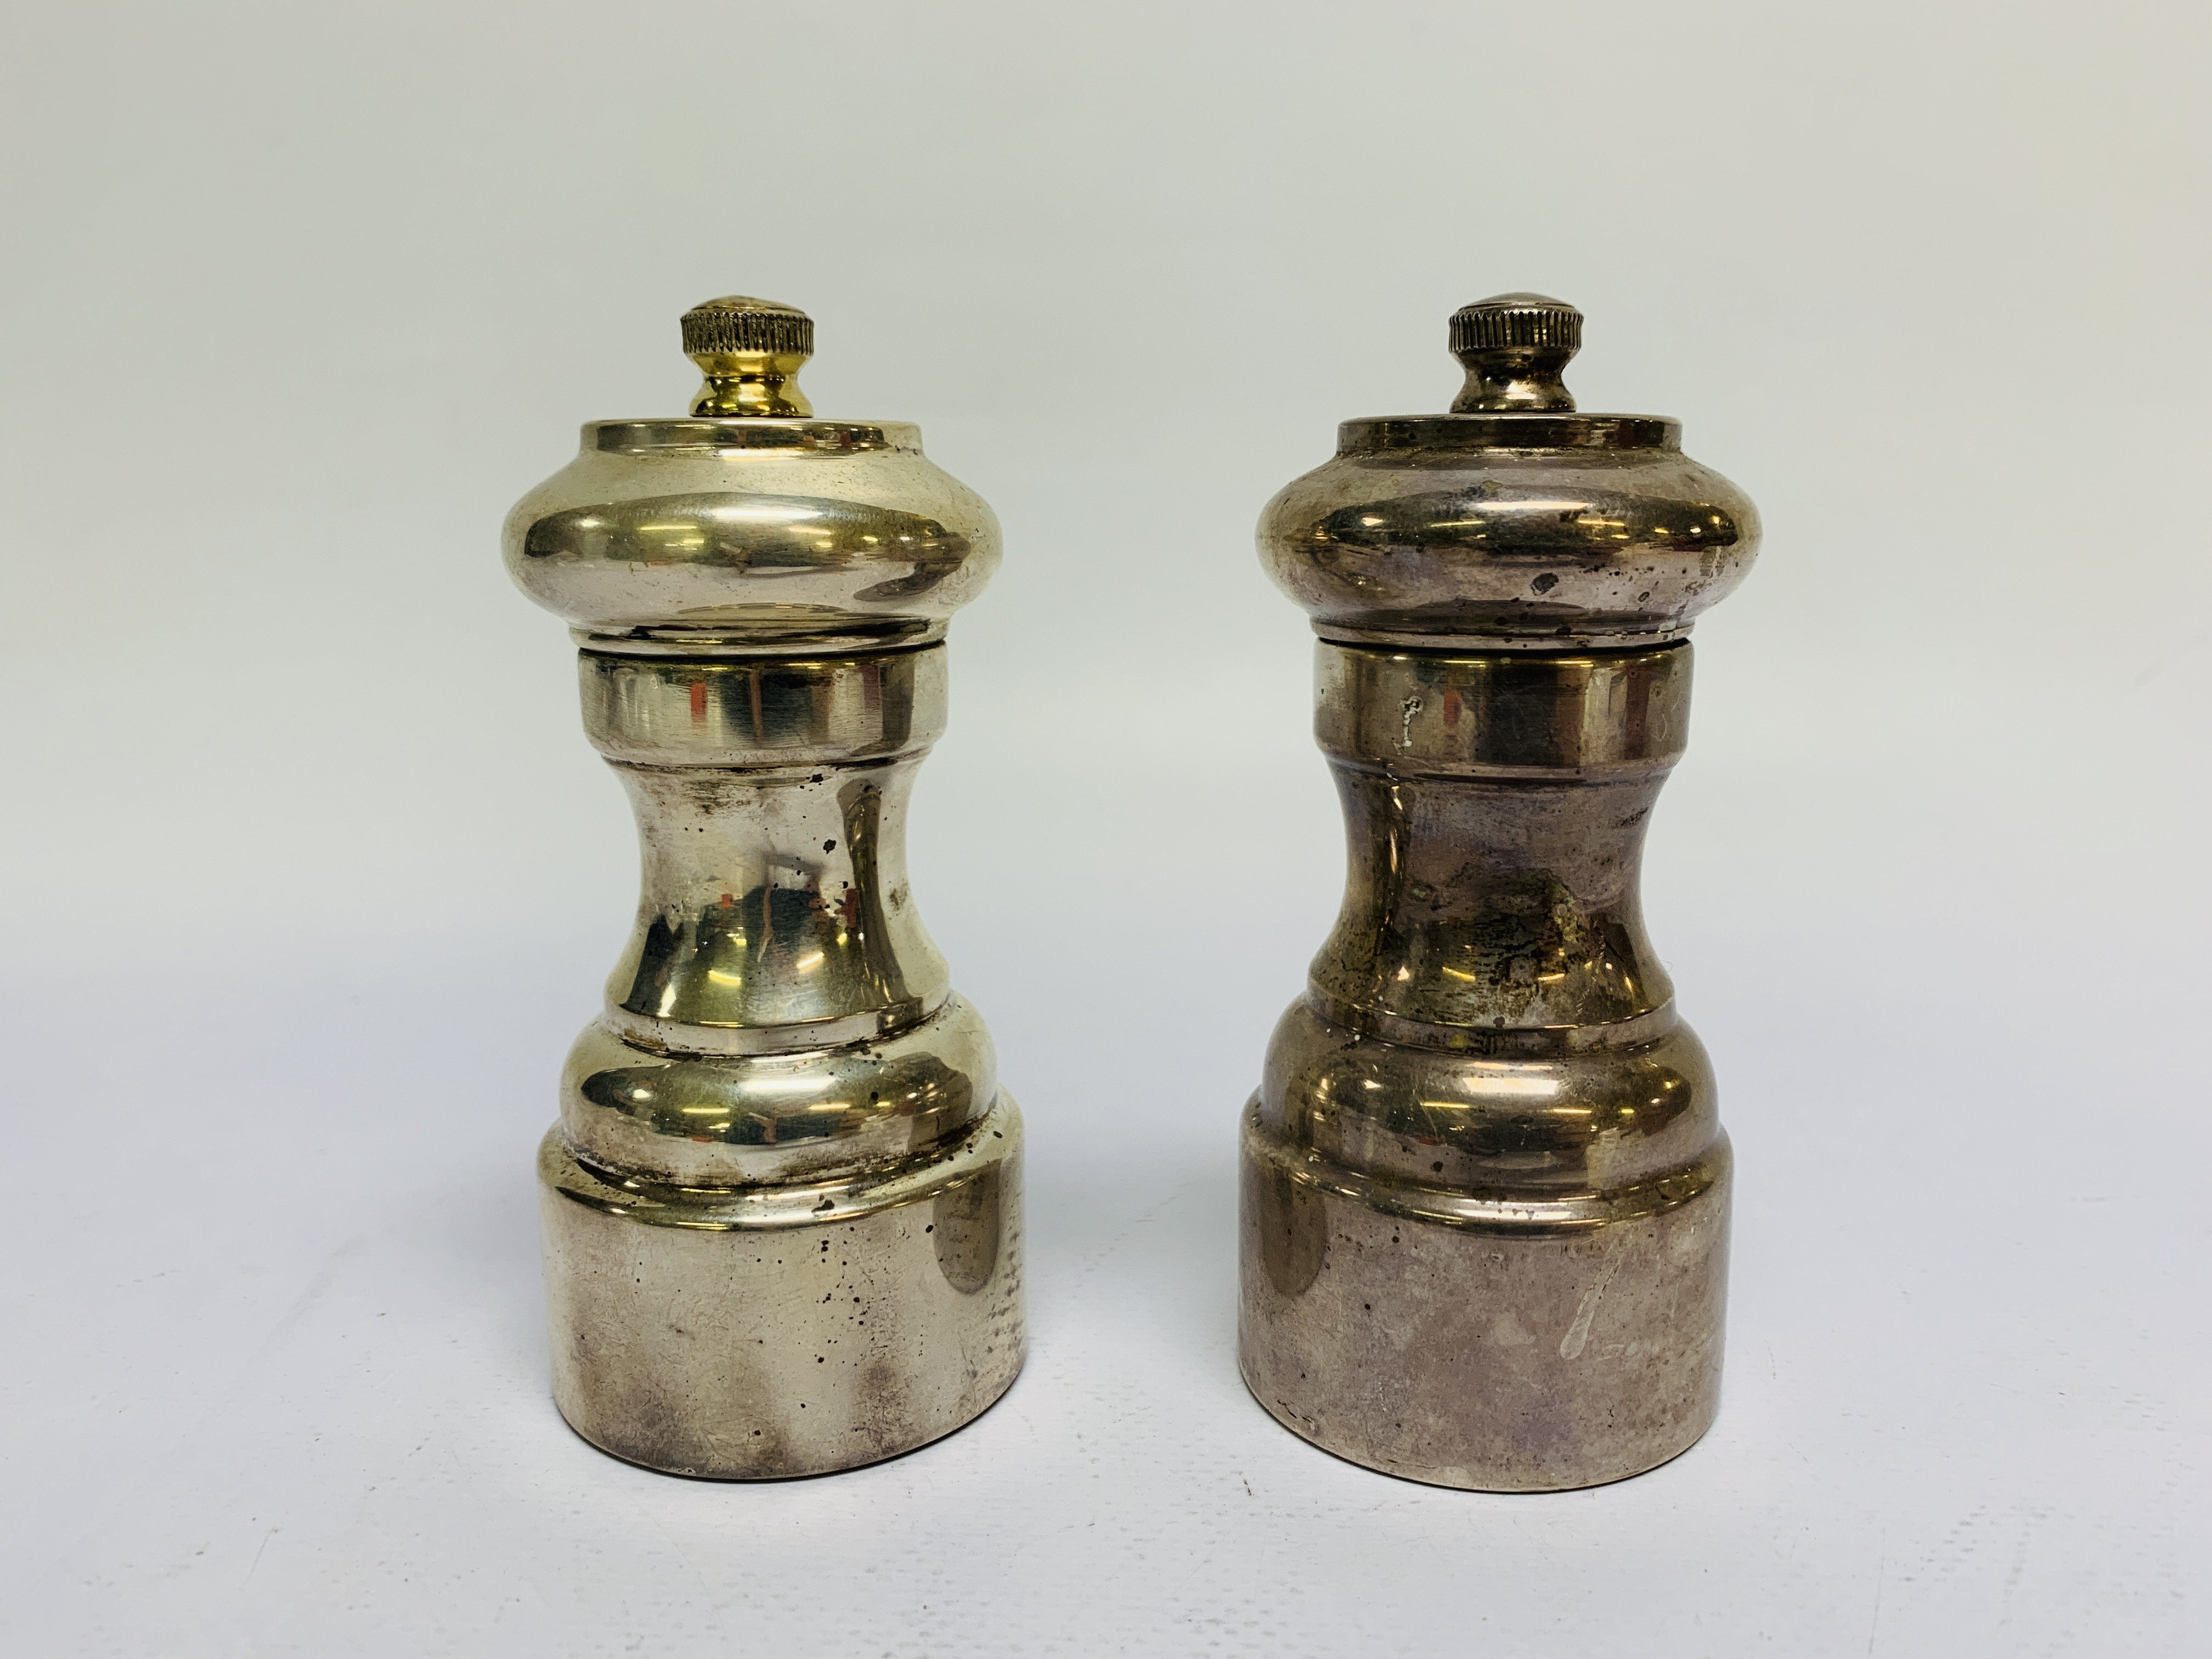 A SILVER PEPPER AND A SILVER SALT GRINDER OF SIMILAR CIRCULAR SHAPE,